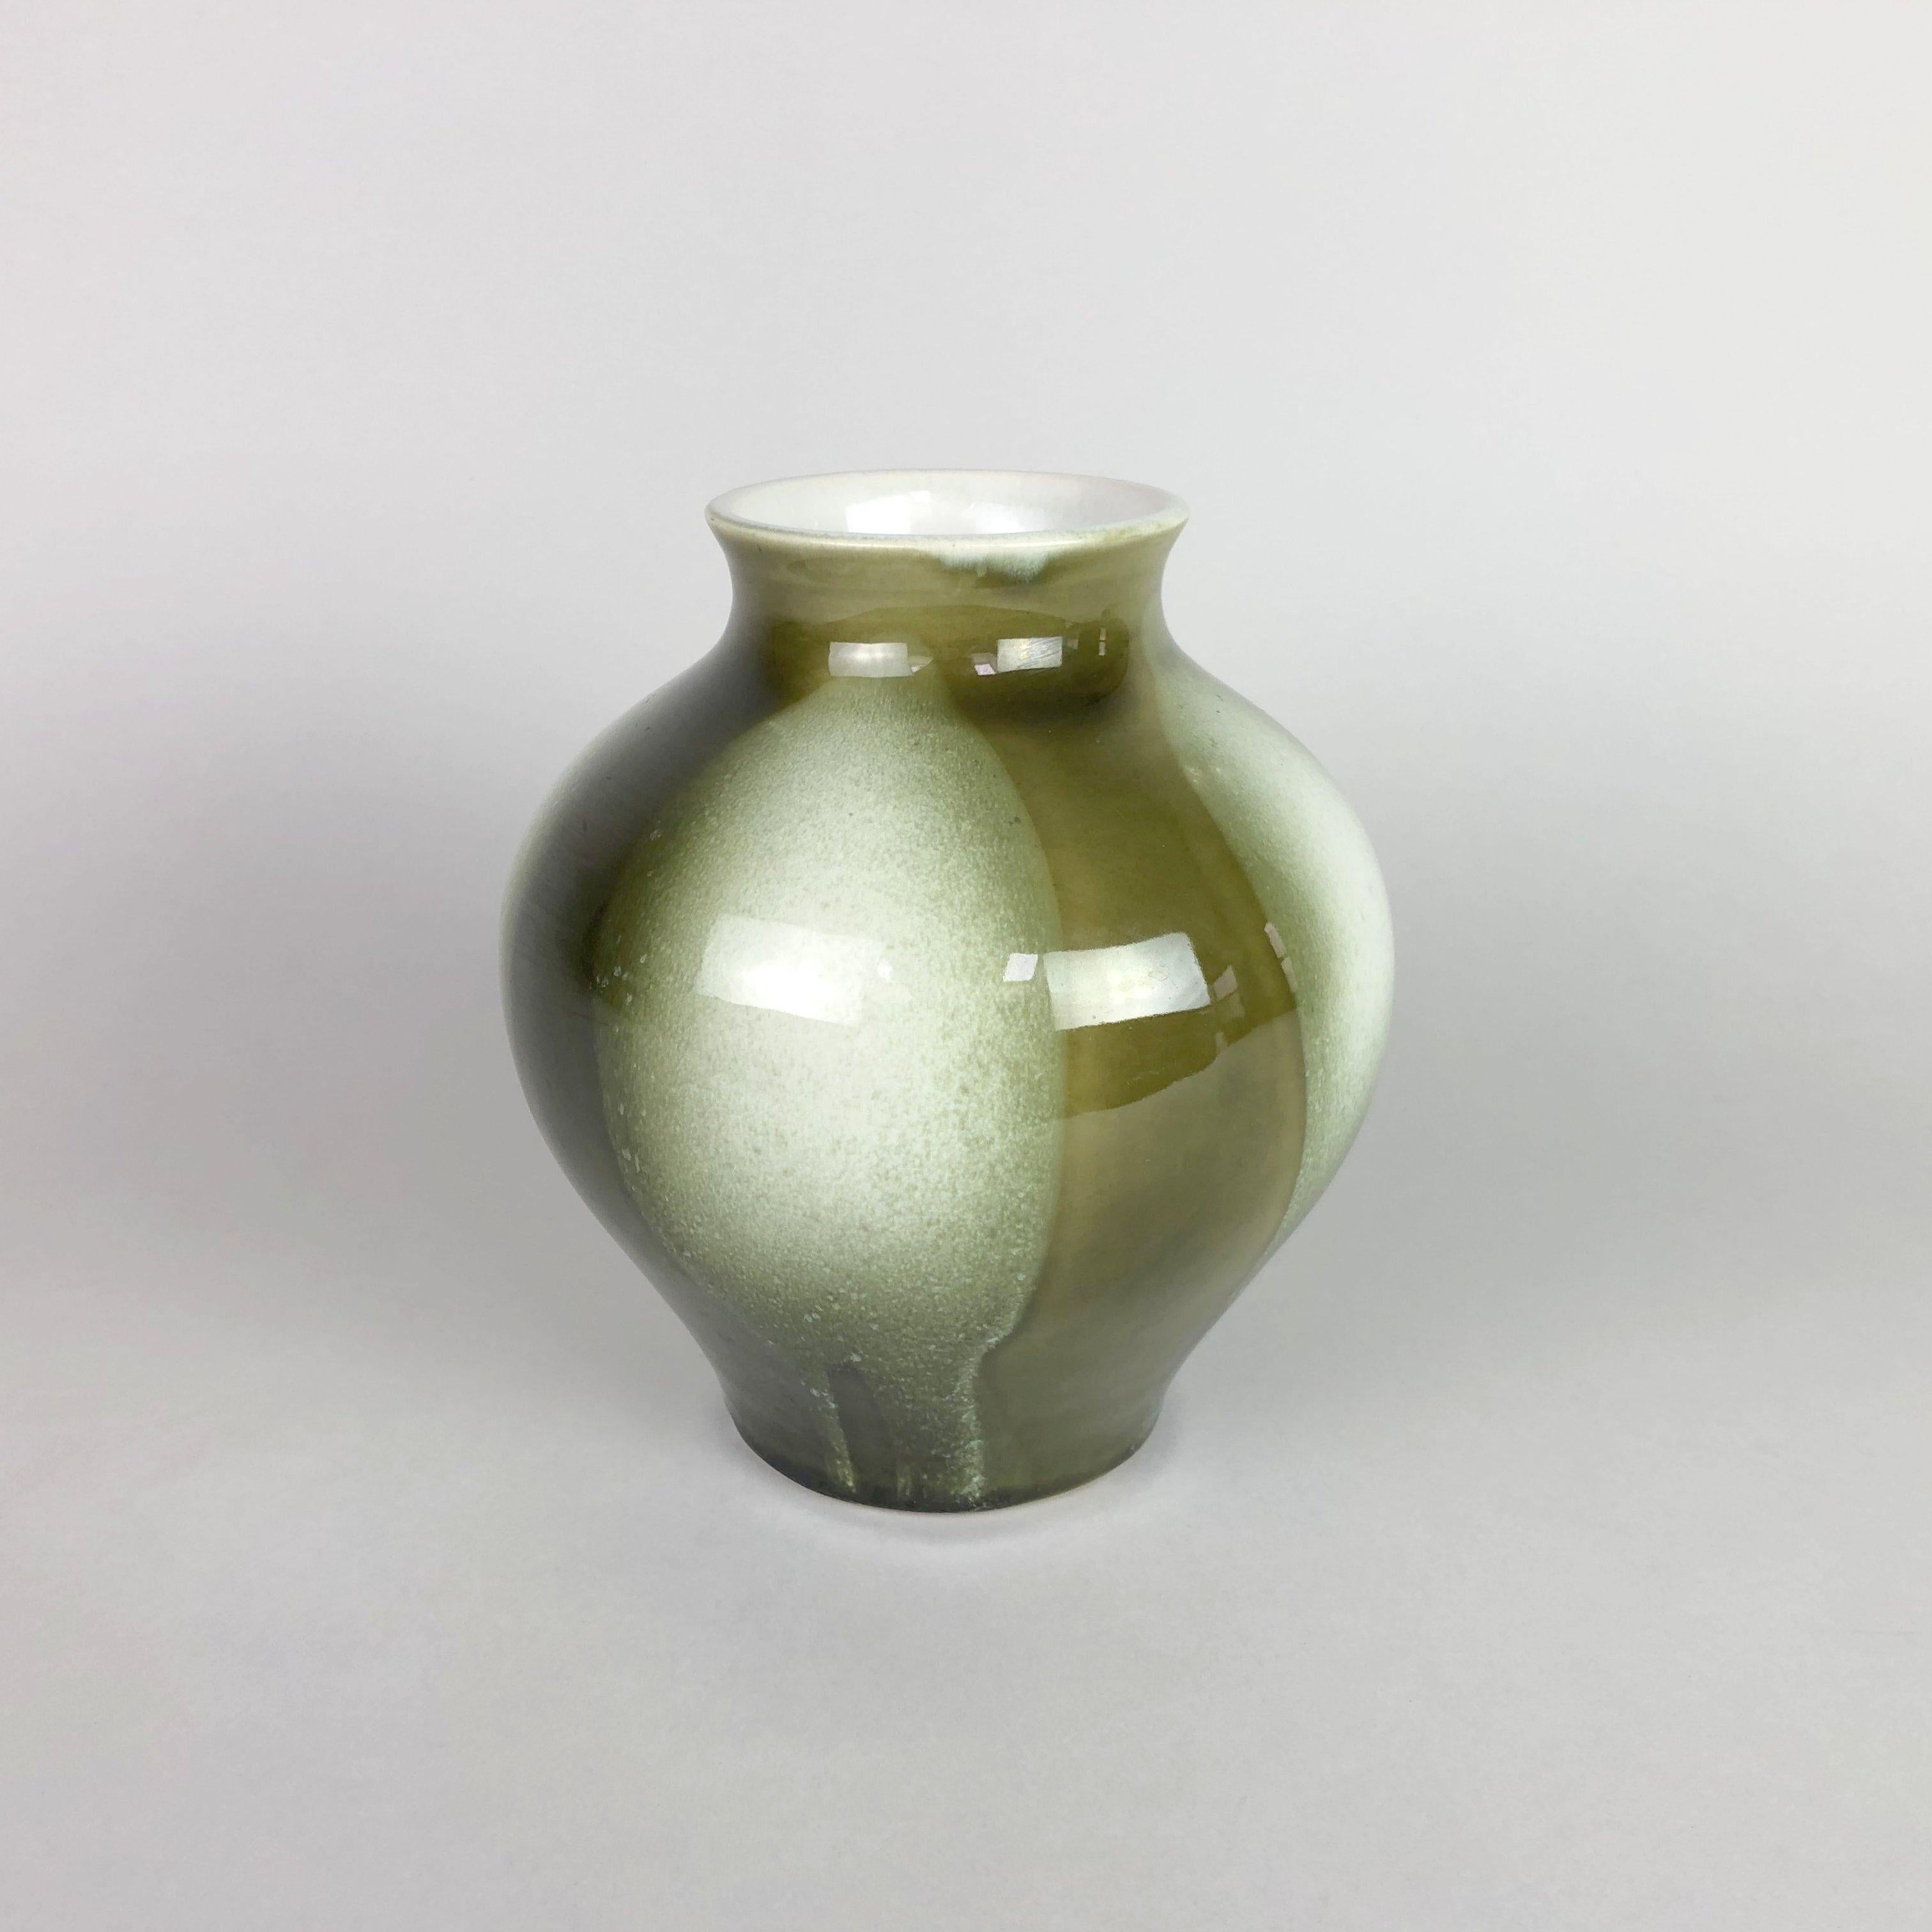 Vintage vase made by Ditmar Urbach in Czechoslovakia in 1970s. Very good vintage condition.